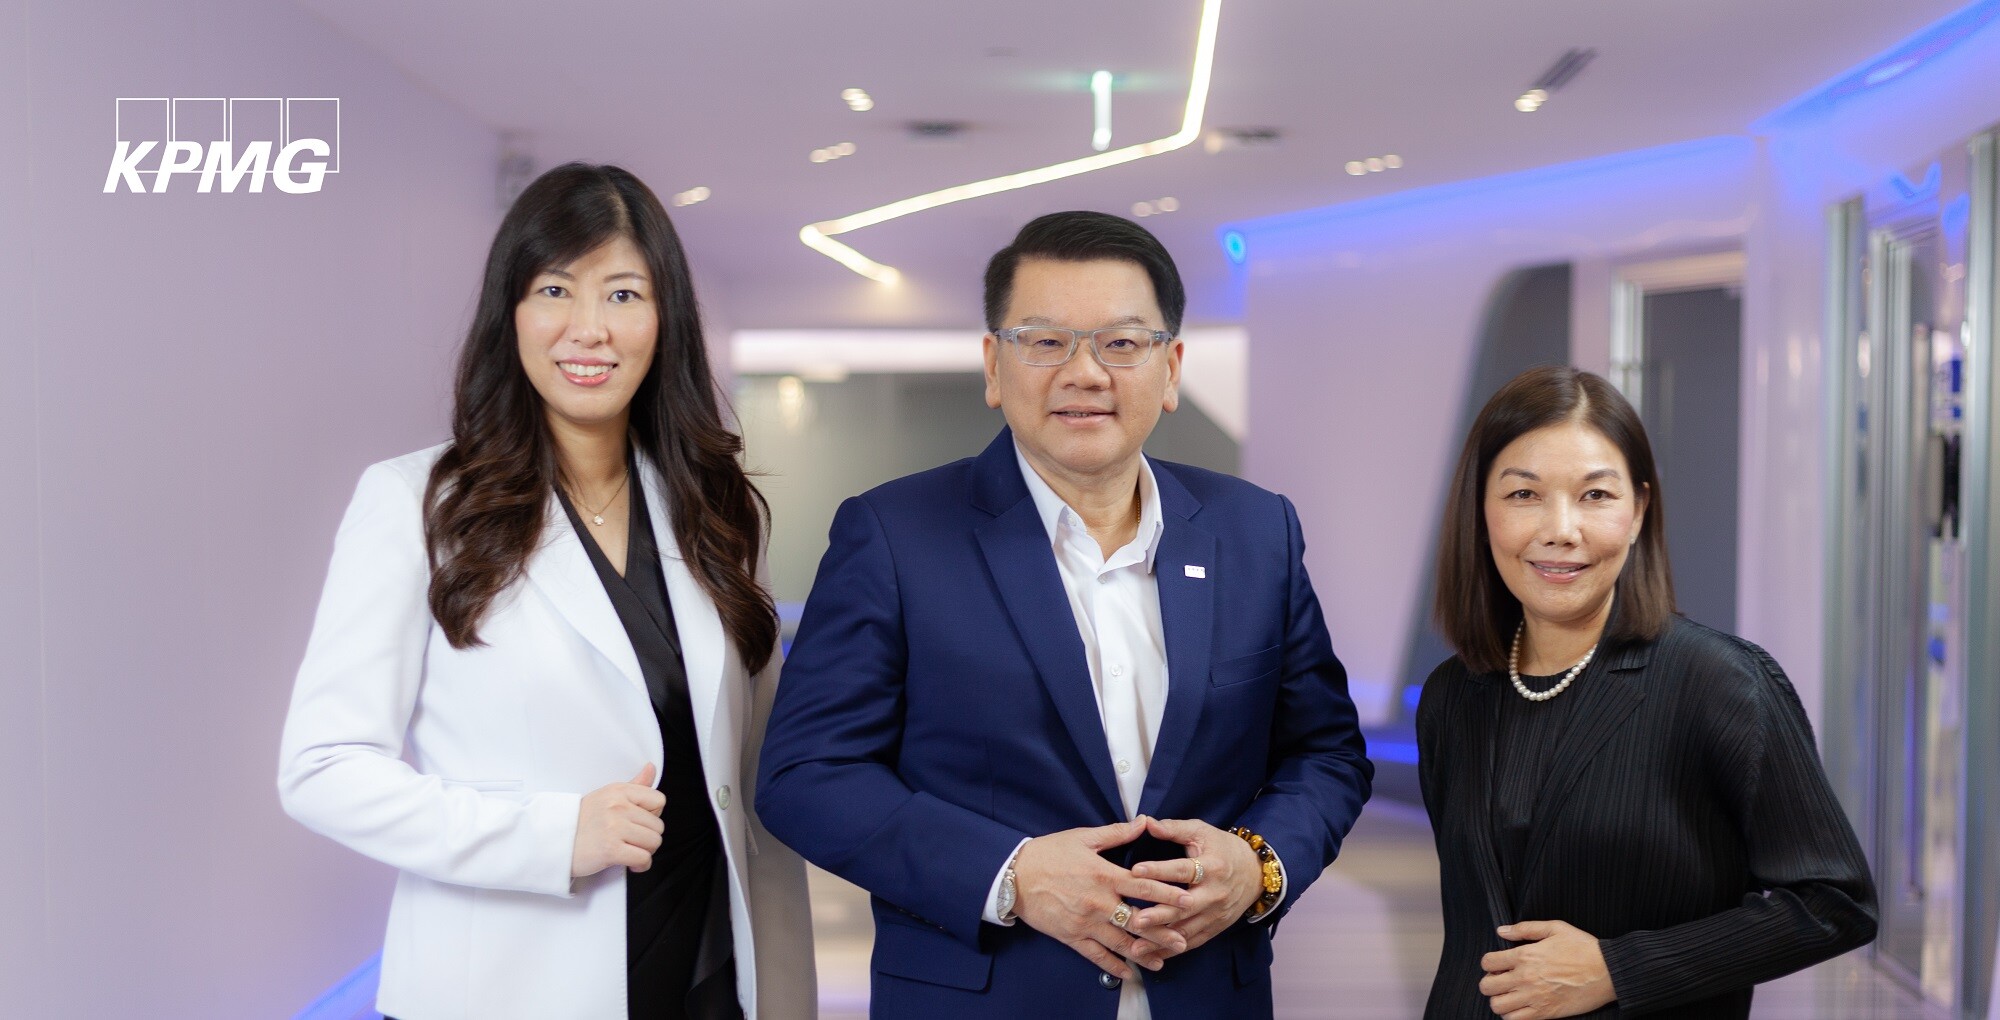 KPMG in Thailand appoints new Head of Audit &amp; Assurance and Head of KPMG Law